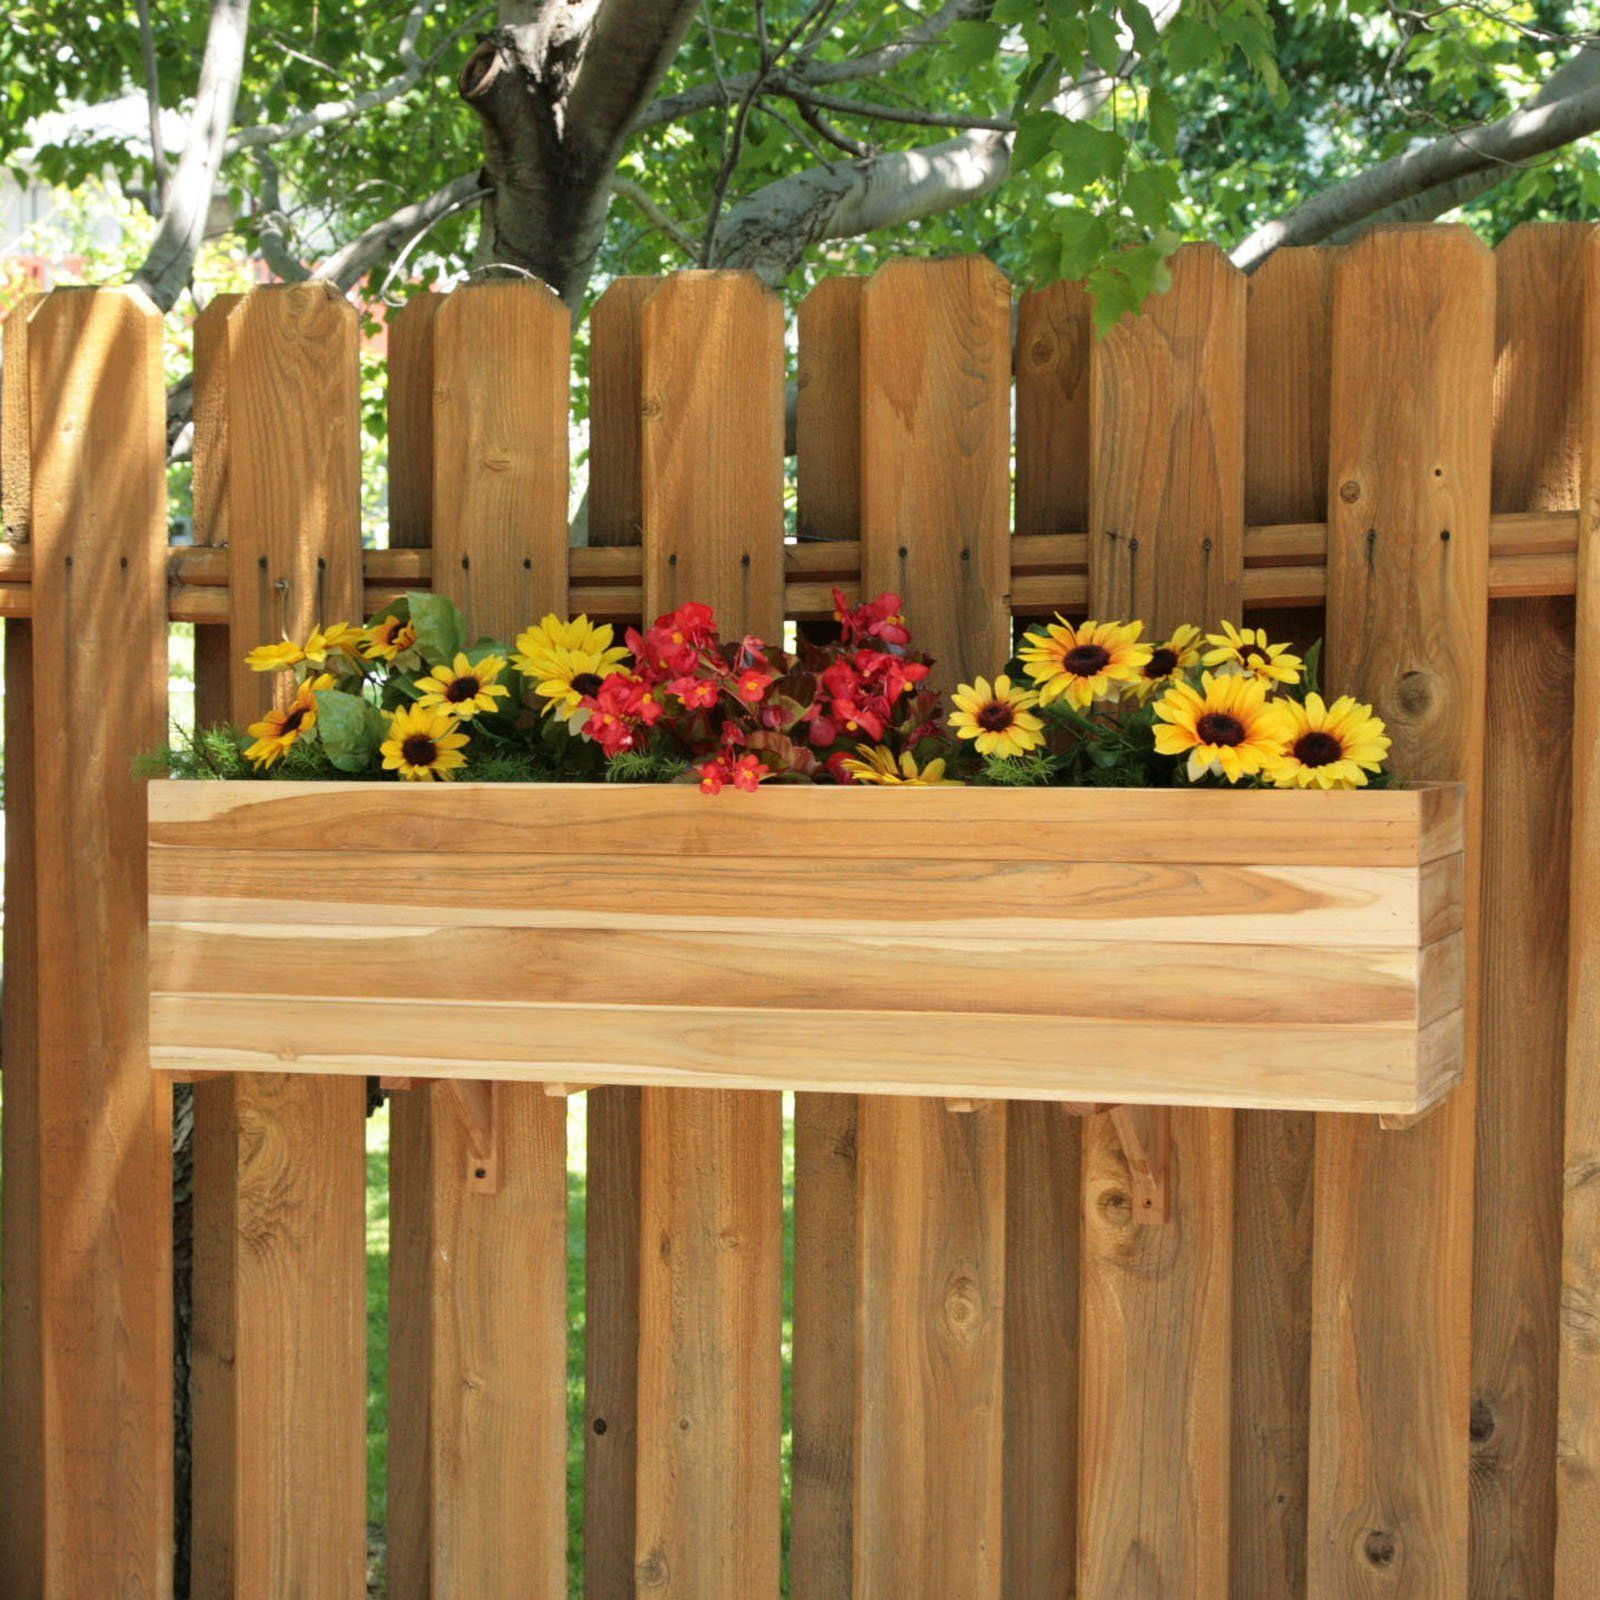 Garden And Patio Floating Wooden Flower Box Design On Wooden Fence in measurements 1600 X 1600